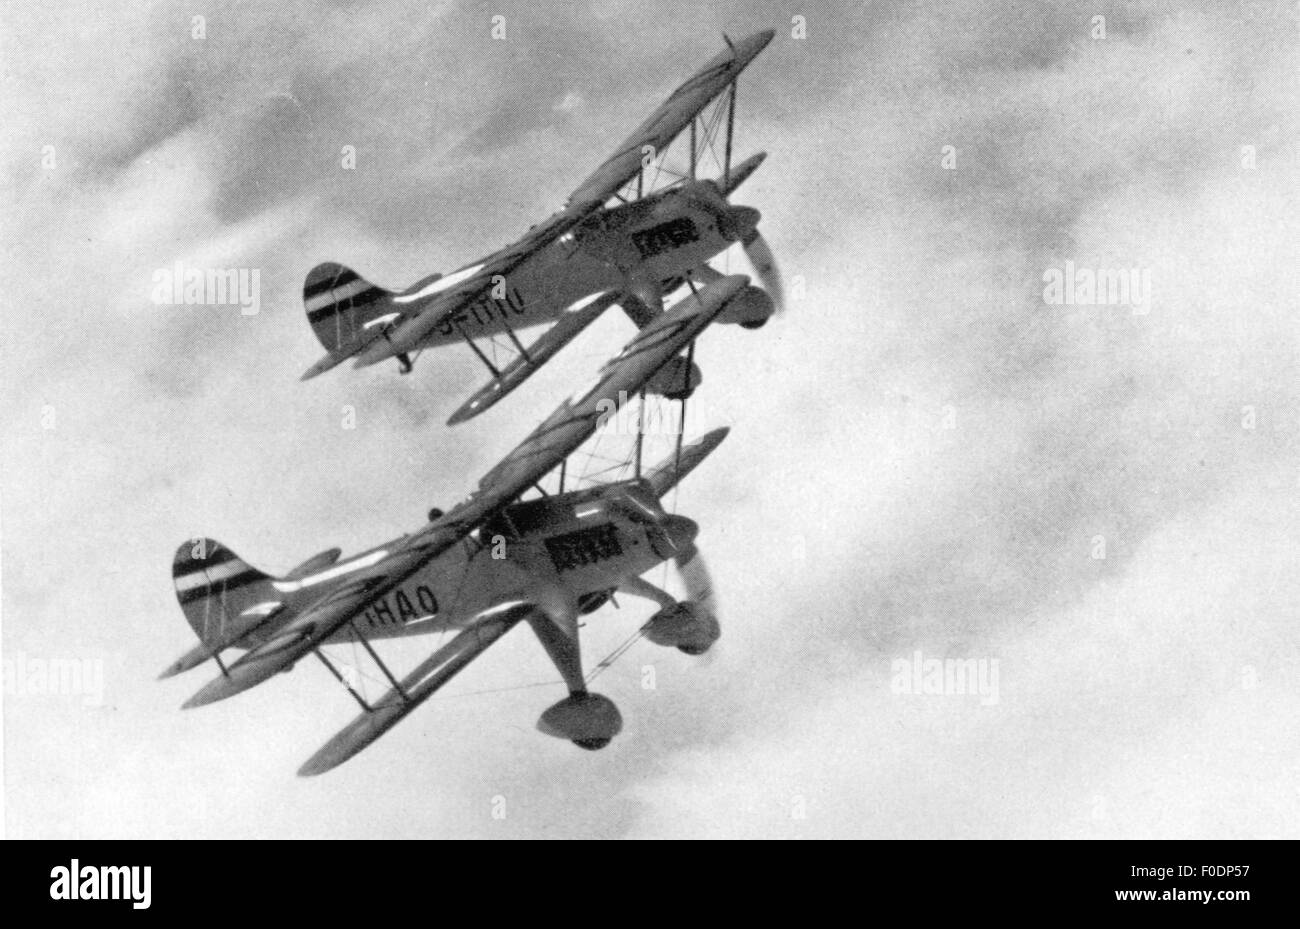 Nazism / National Socialism, military, Luftwaffe (German Air Force), ground attack aircrafts Henschel Hs 123, 1935 / 1936, air force, Wehrmacht, armed forces, aeroplane, airplane, plane, airplanes, aeroplanes, planes, warplane, warplanes, tactical aircraft, ground attack aircraft, bi-plane, biplane, bi-planes, biplanes, Germany, German Reich, Third Reich, 1930s, 30s, 20th century, historic, historical, Additional-Rights-Clearences-Not Available Stock Photo